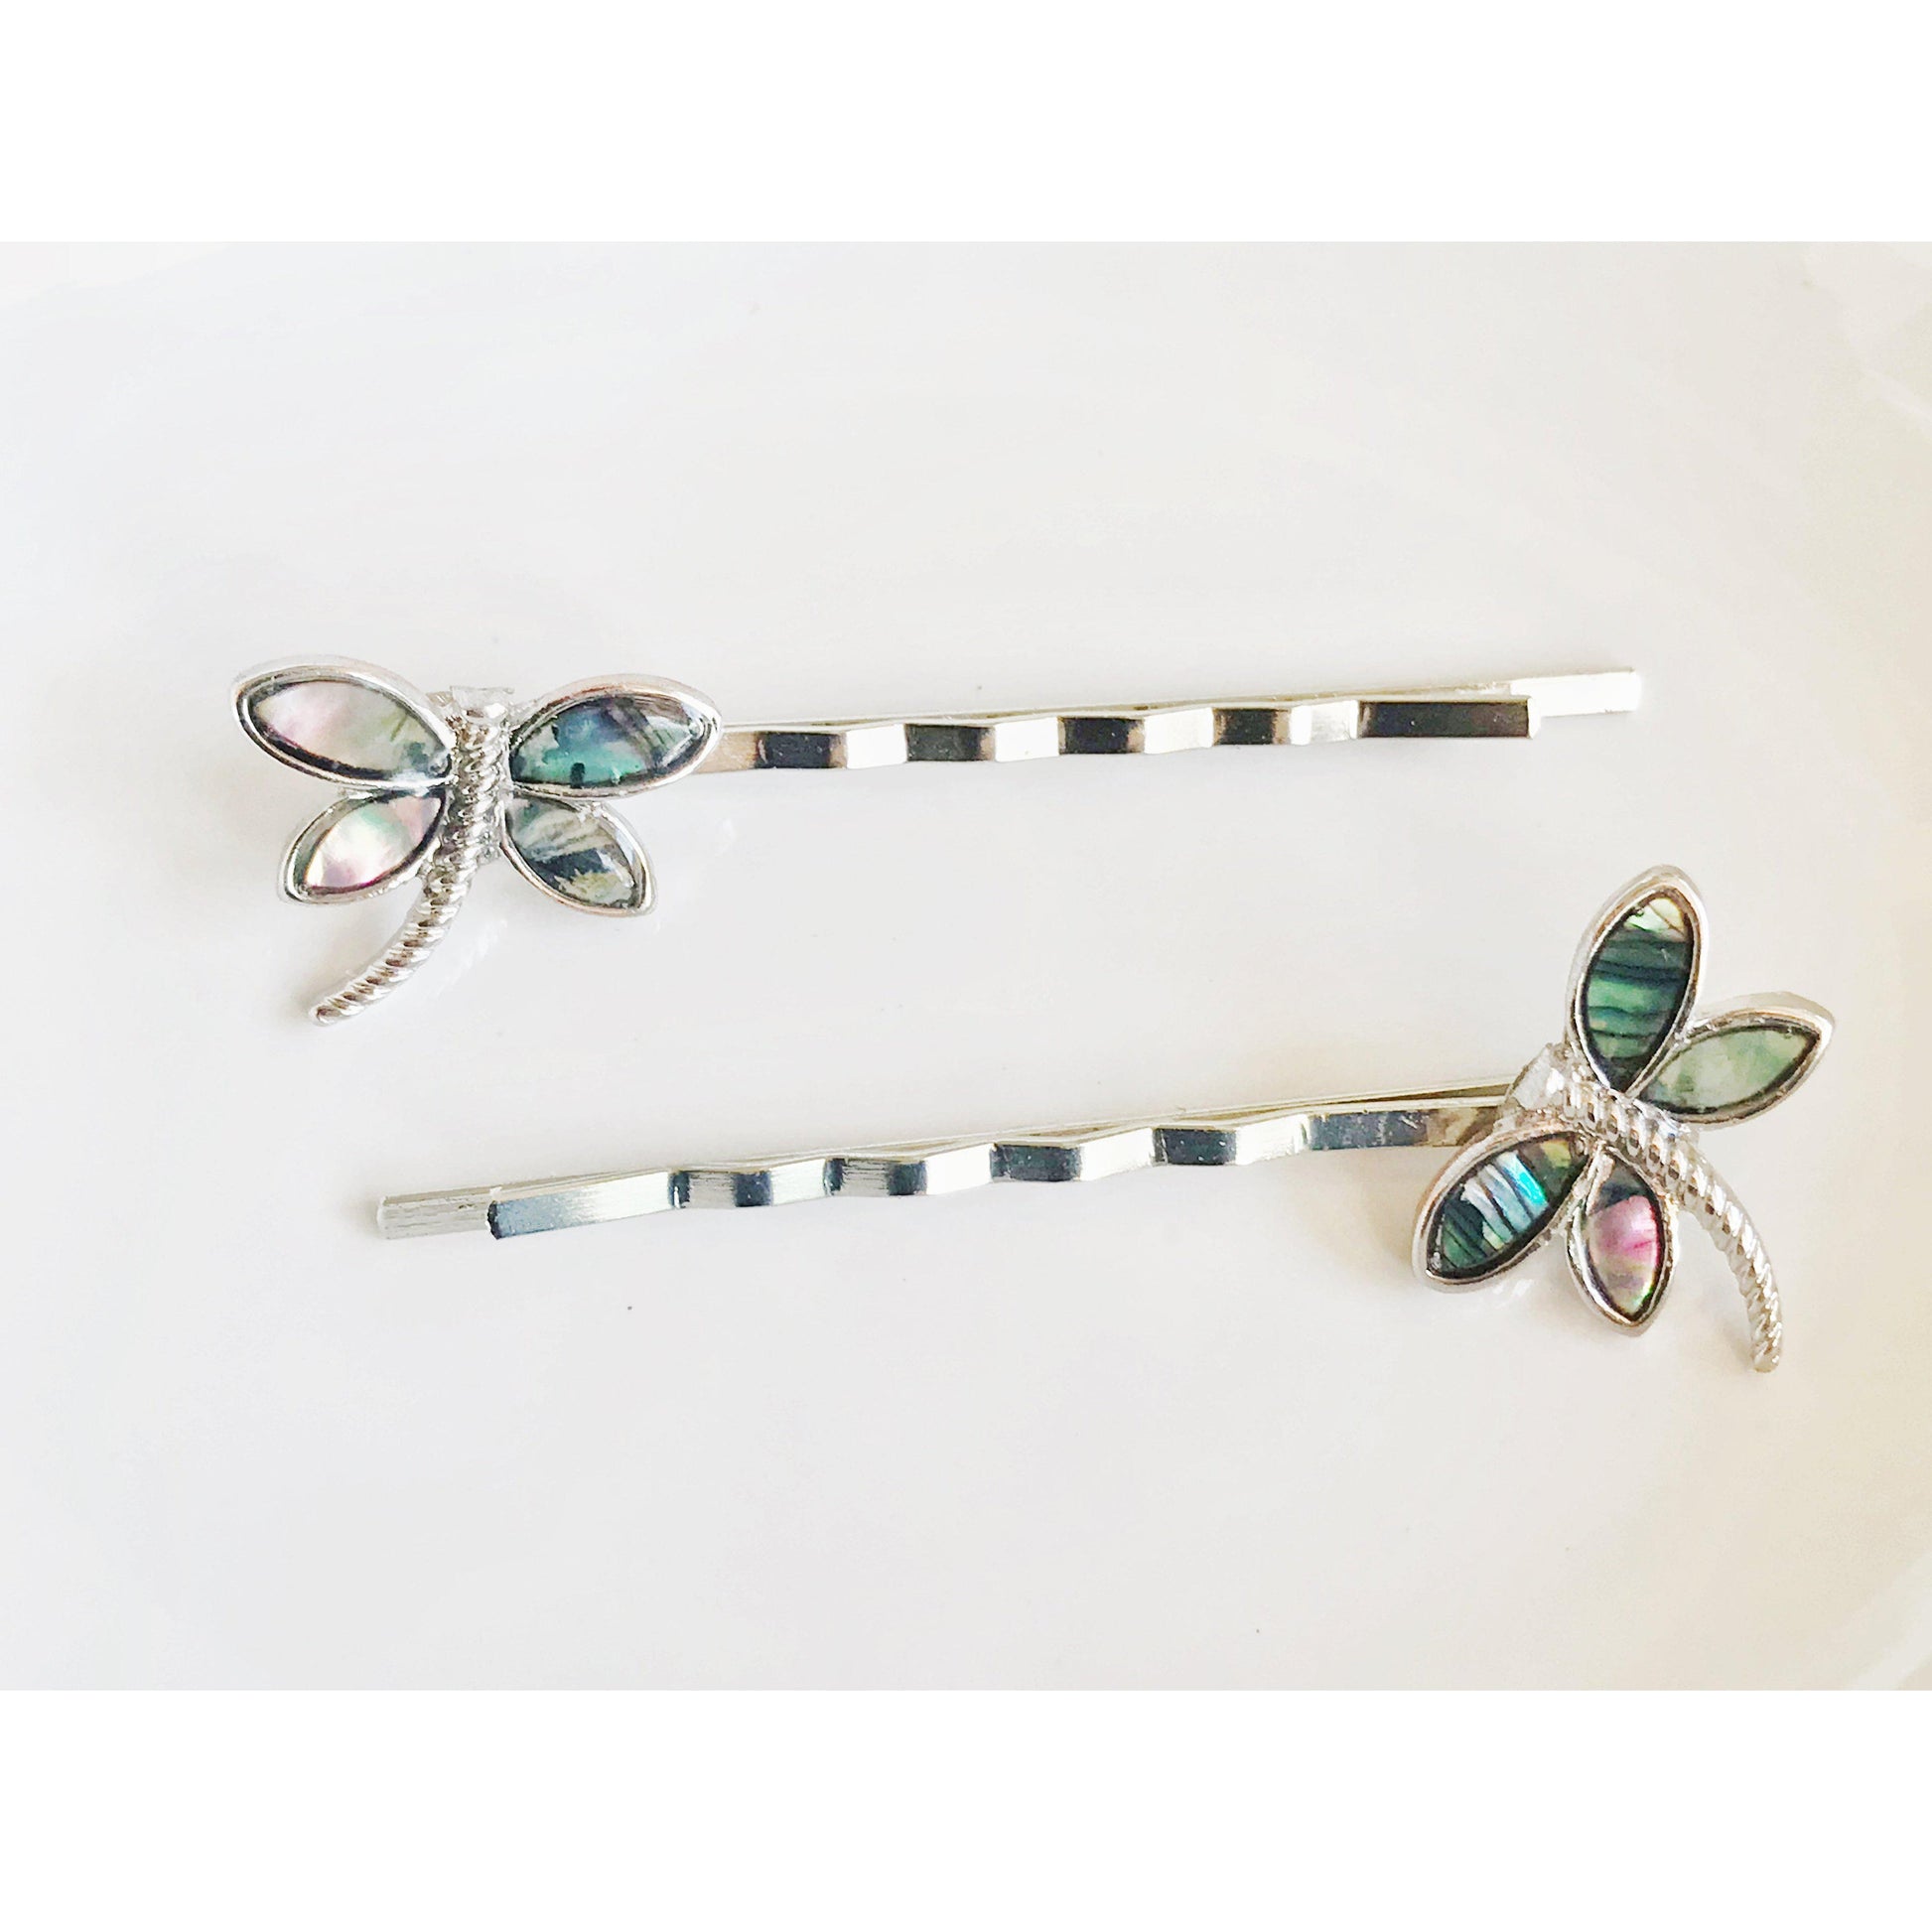 Women's Natural Shell Abalone Dragonfly Bobby Pin Hair Accessories - Exquisite Nature-Inspired Styling